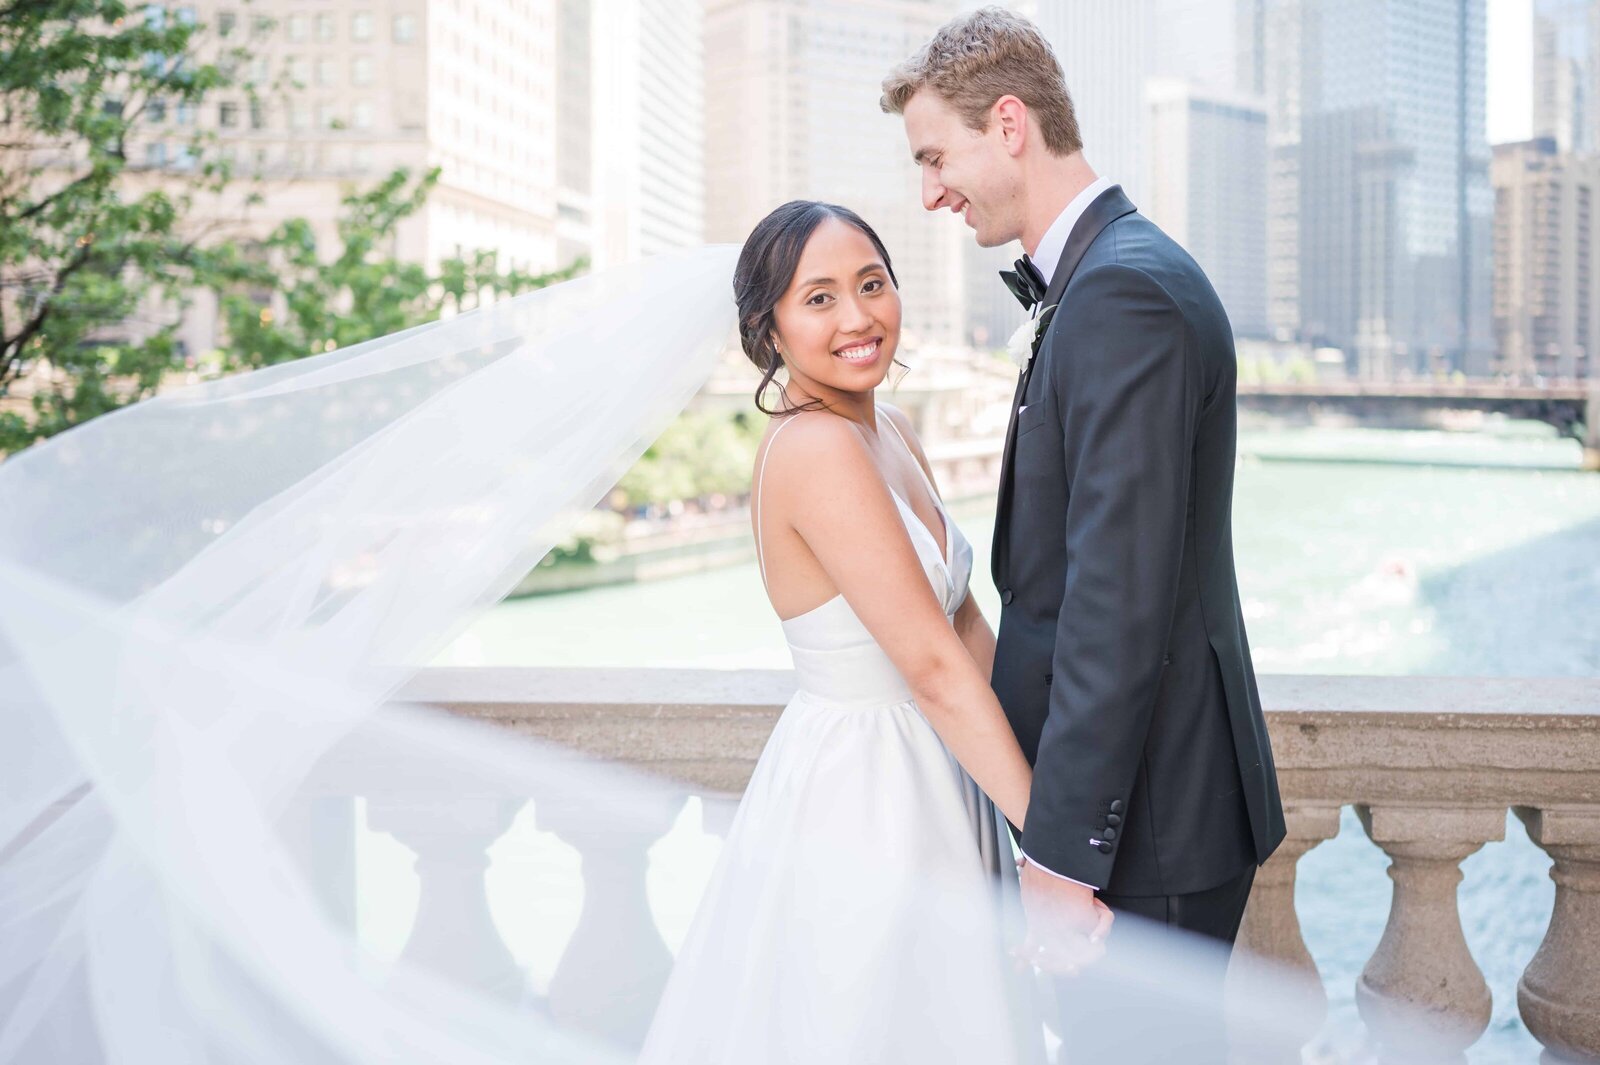 Downtown Chicago Portrait of Bride and Groom.